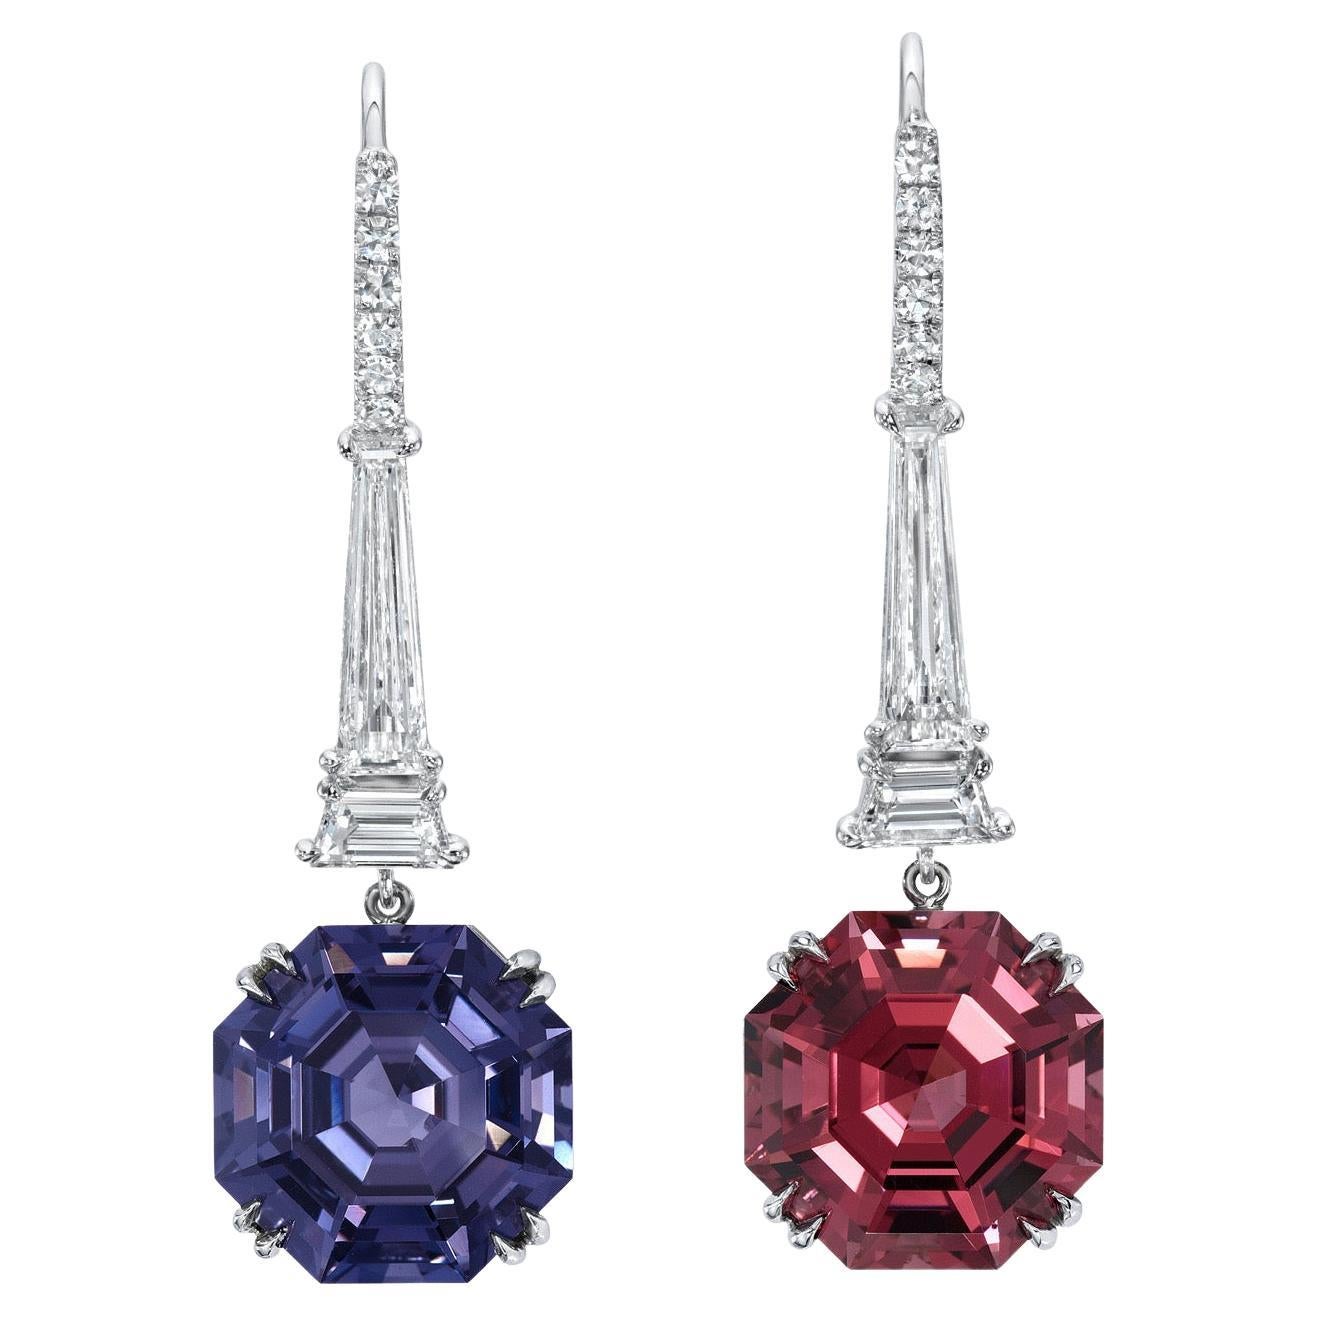 Spinel Earrings 10.24 Carat Octagons